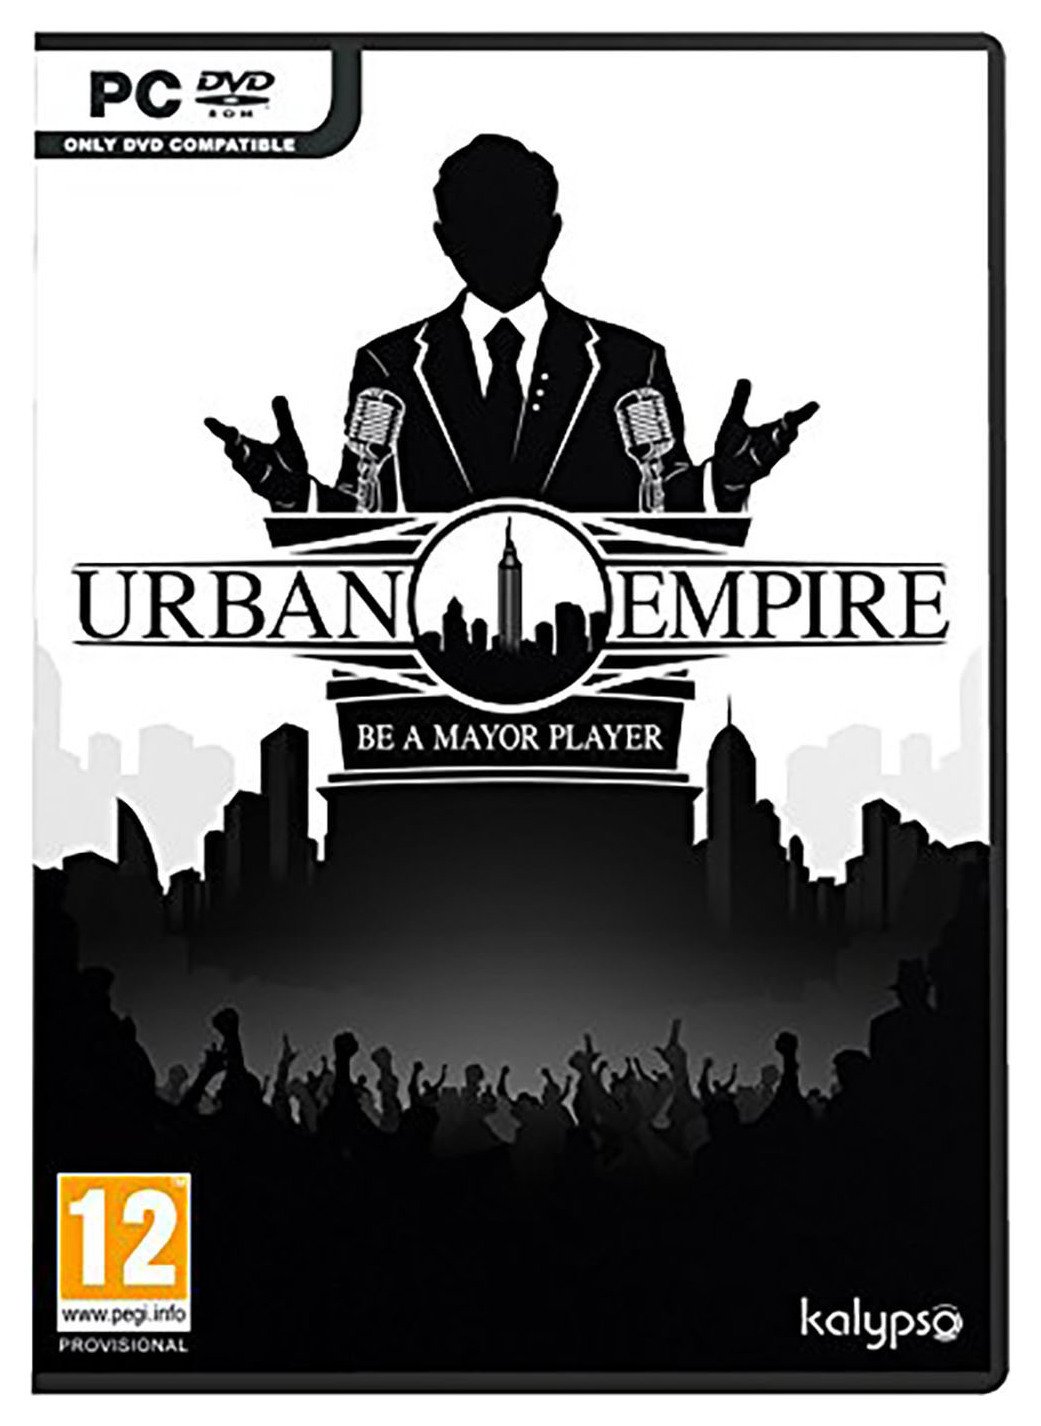 Urban Empire PC Game Review